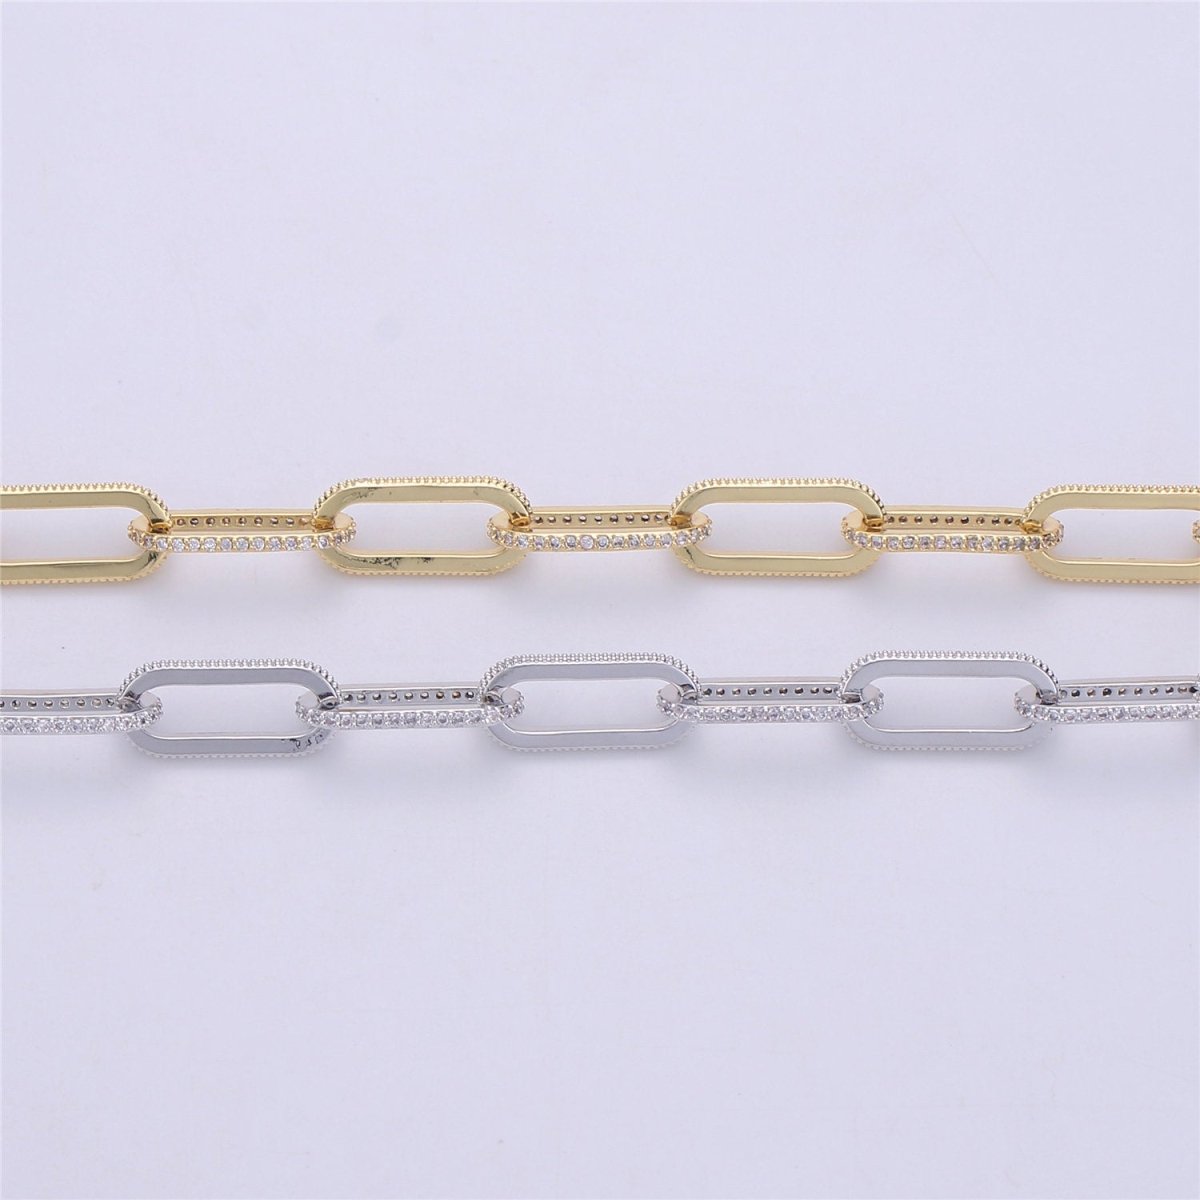 Gold Silver Chunky Micro Pave Necklace Chunky CZ Diamond Thick Elongated PAPERCLIP Chain by Meter in 24K Gold Filled for Jewelry Supply | ROLL-082(O-057), ROLL-083(CL-O-058) Clearance Pricing - DLUXCA